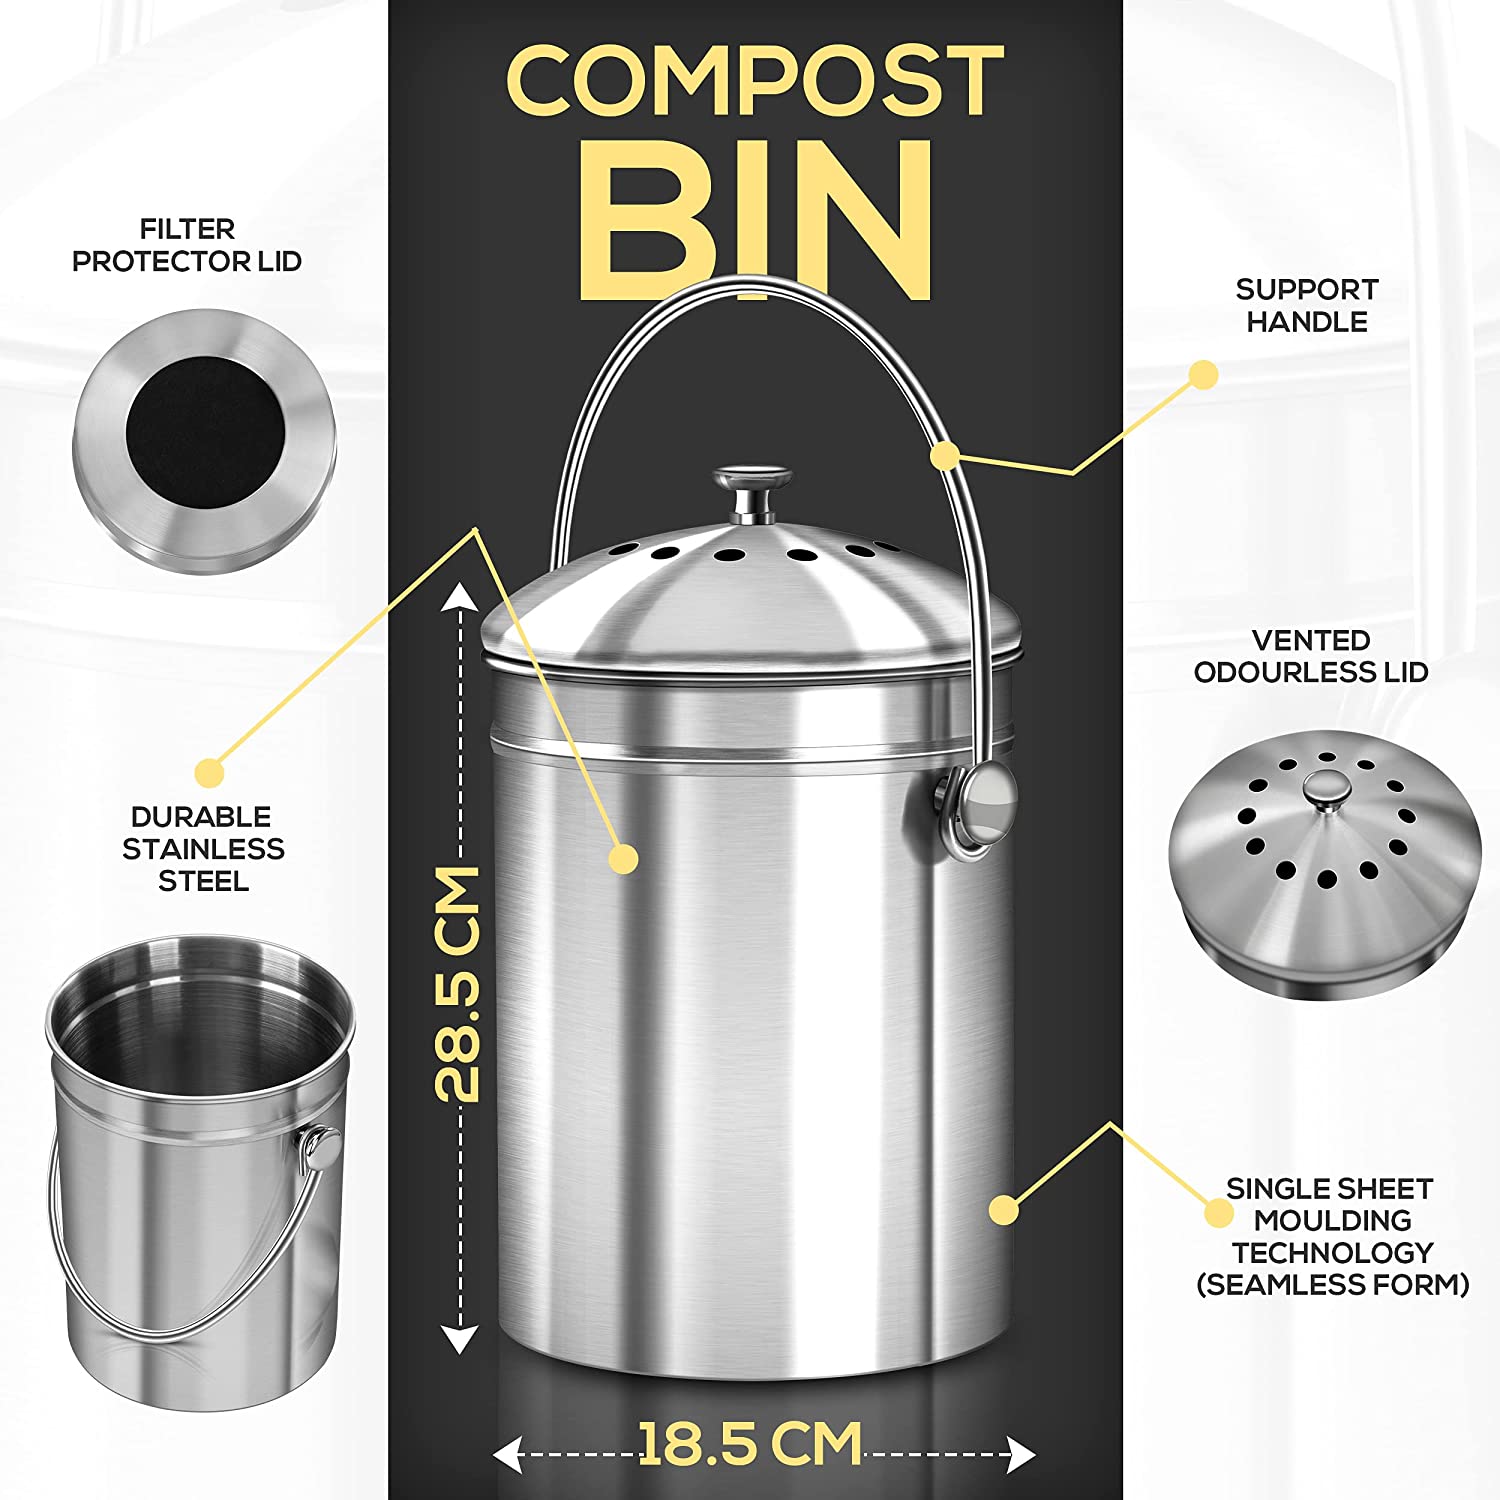 Exaco - 2-N-1 Kitchen Compost Bucket, Stainless Steel, Model CPBS03